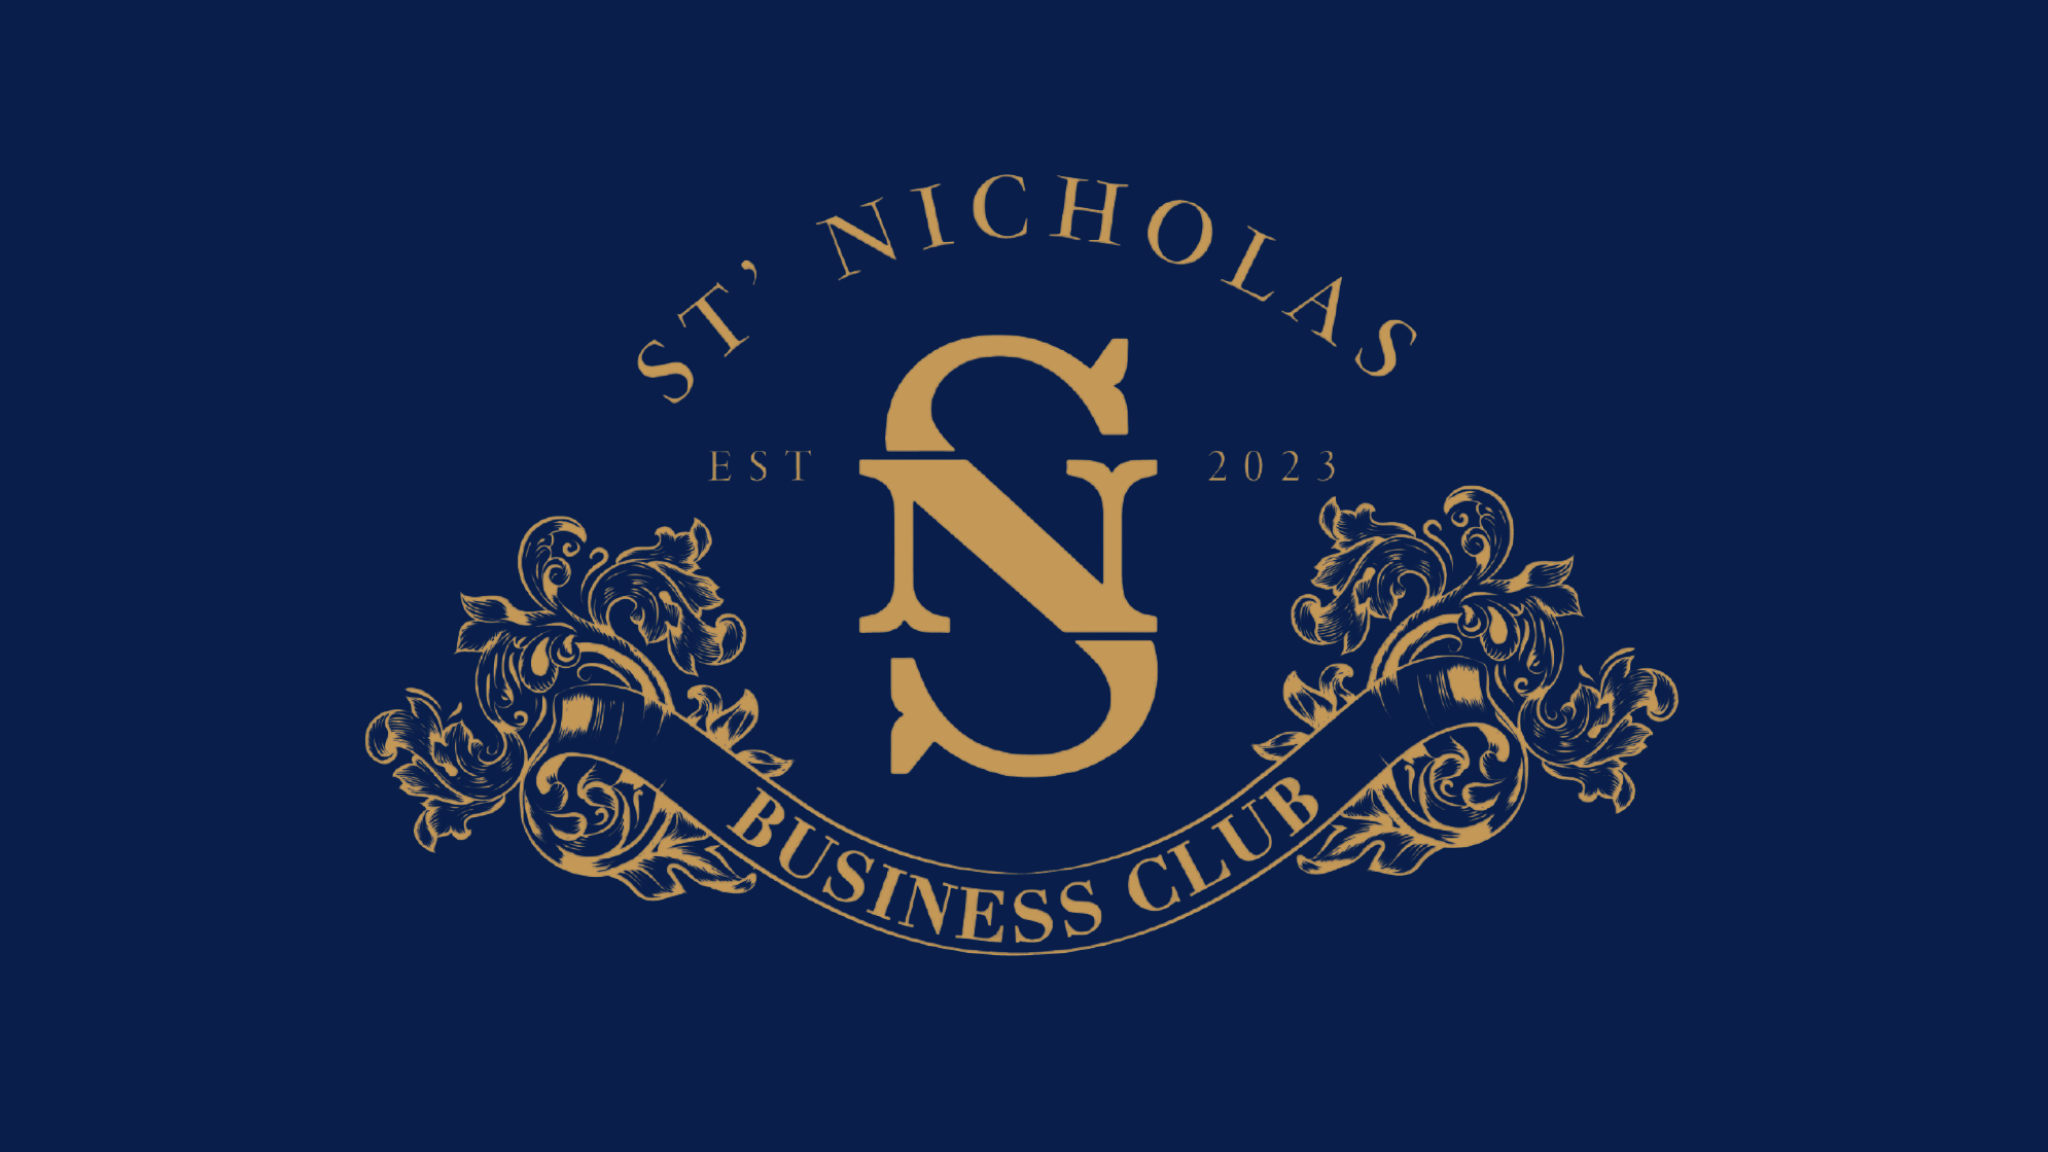 Read more about the article St’ Nicholas Business Club Inaugural Celebration Highlights